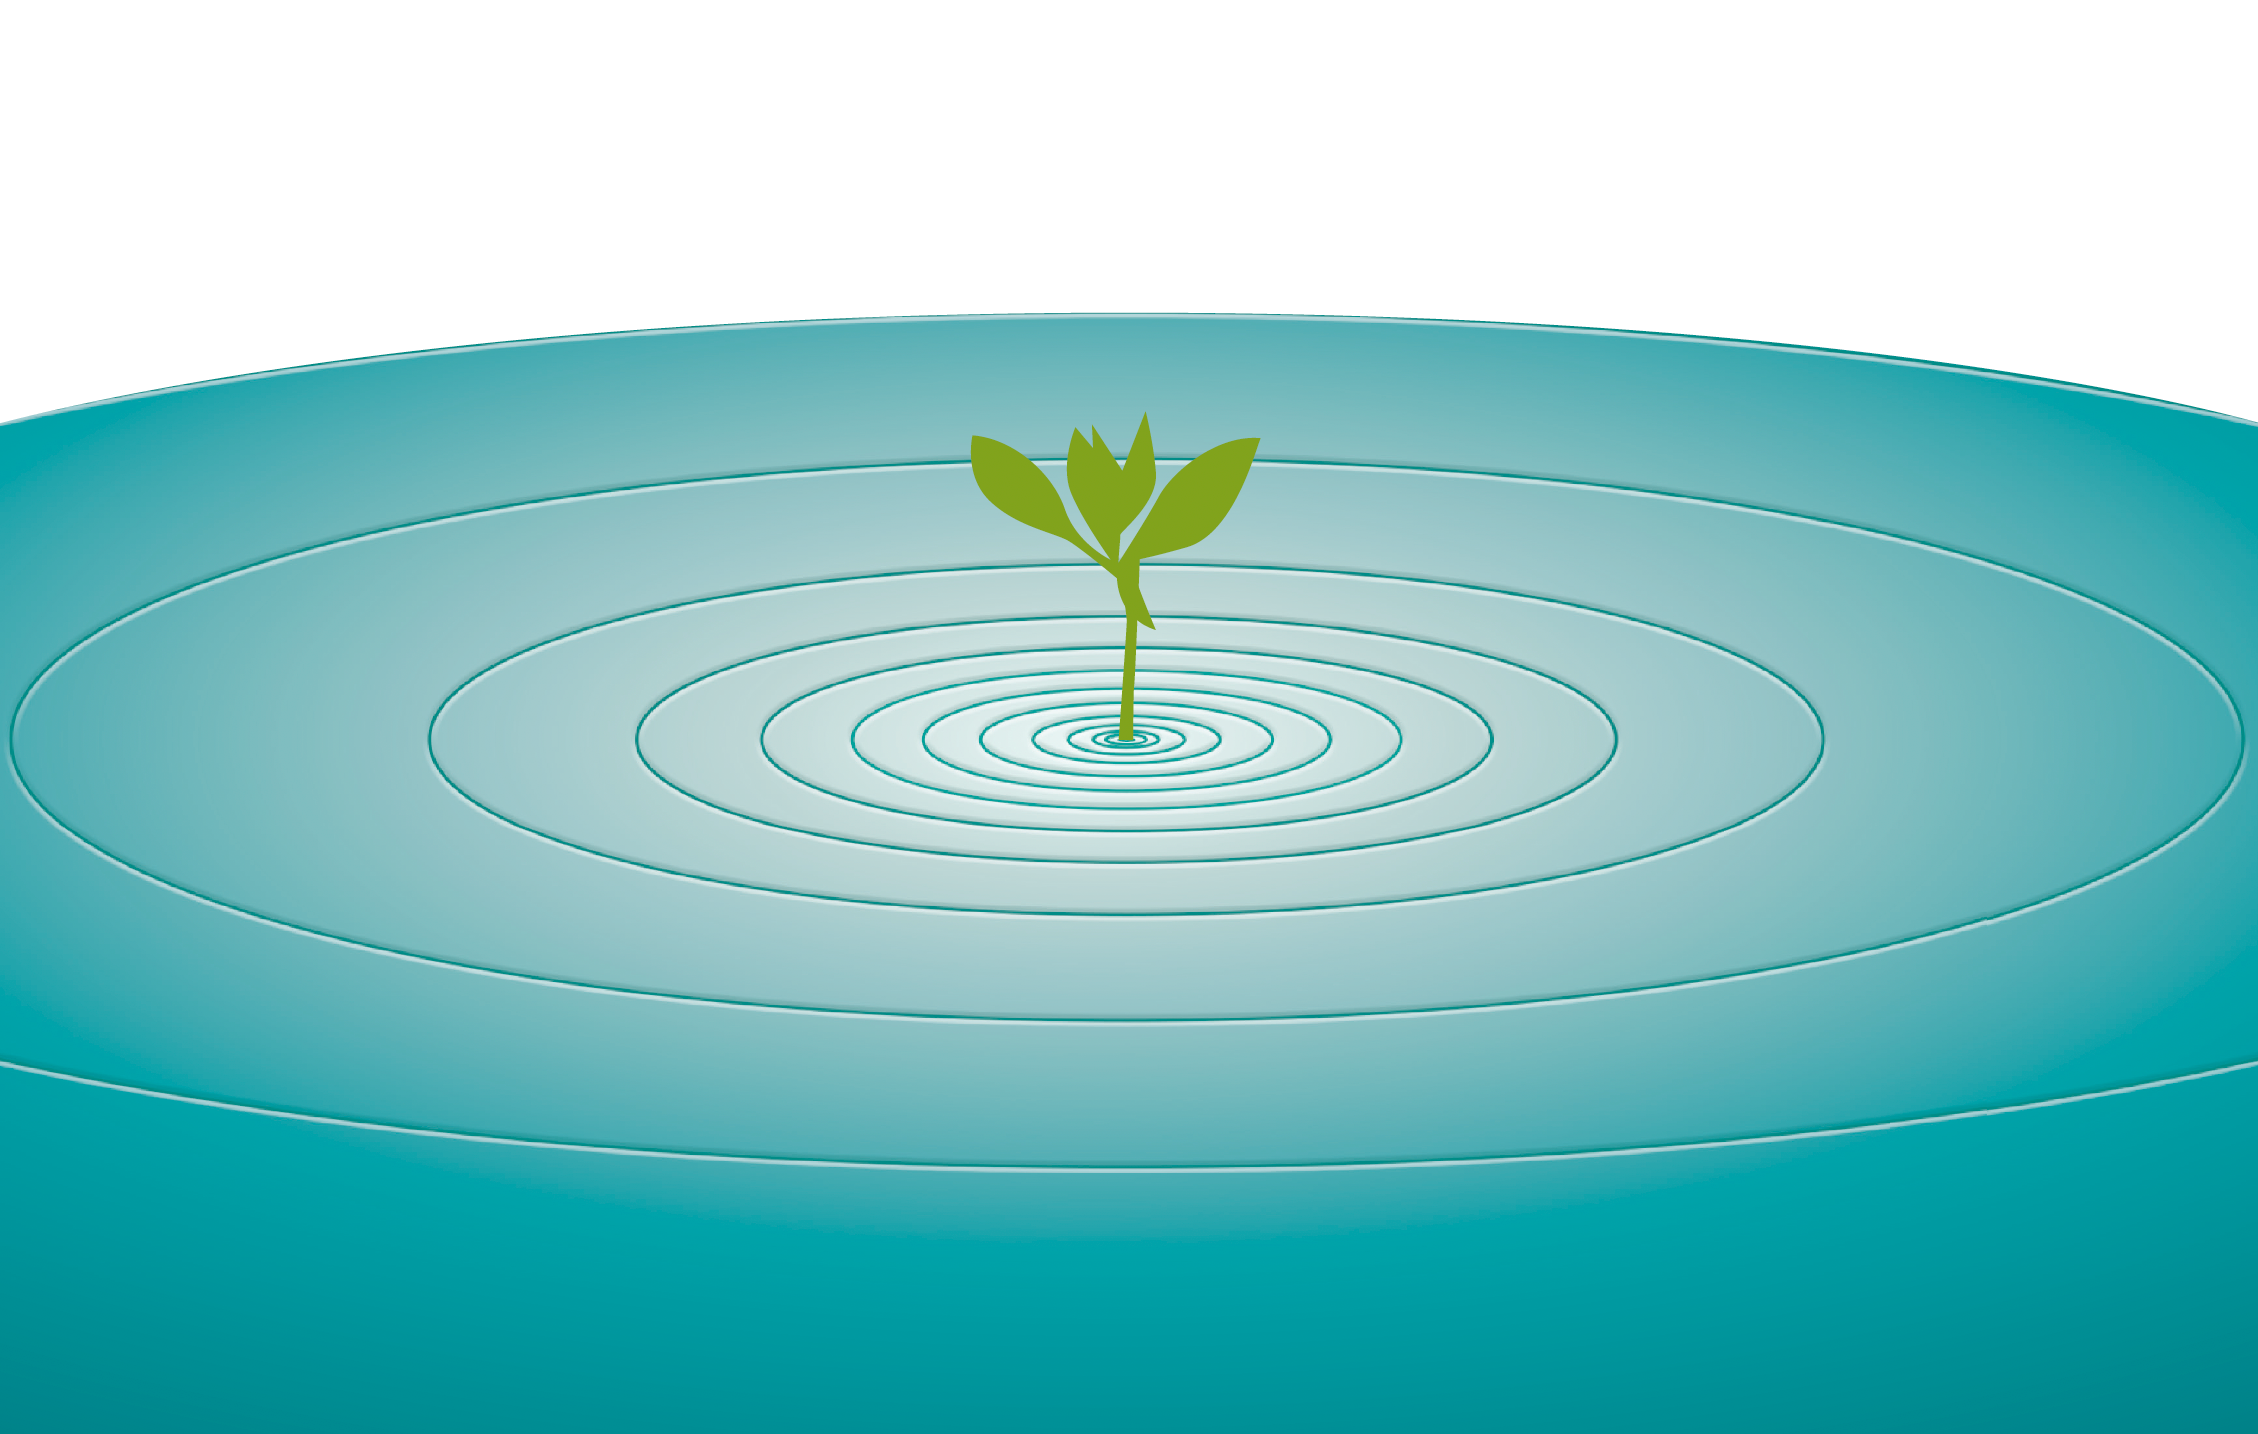 Cartoon of single plant surrounded by calm water.